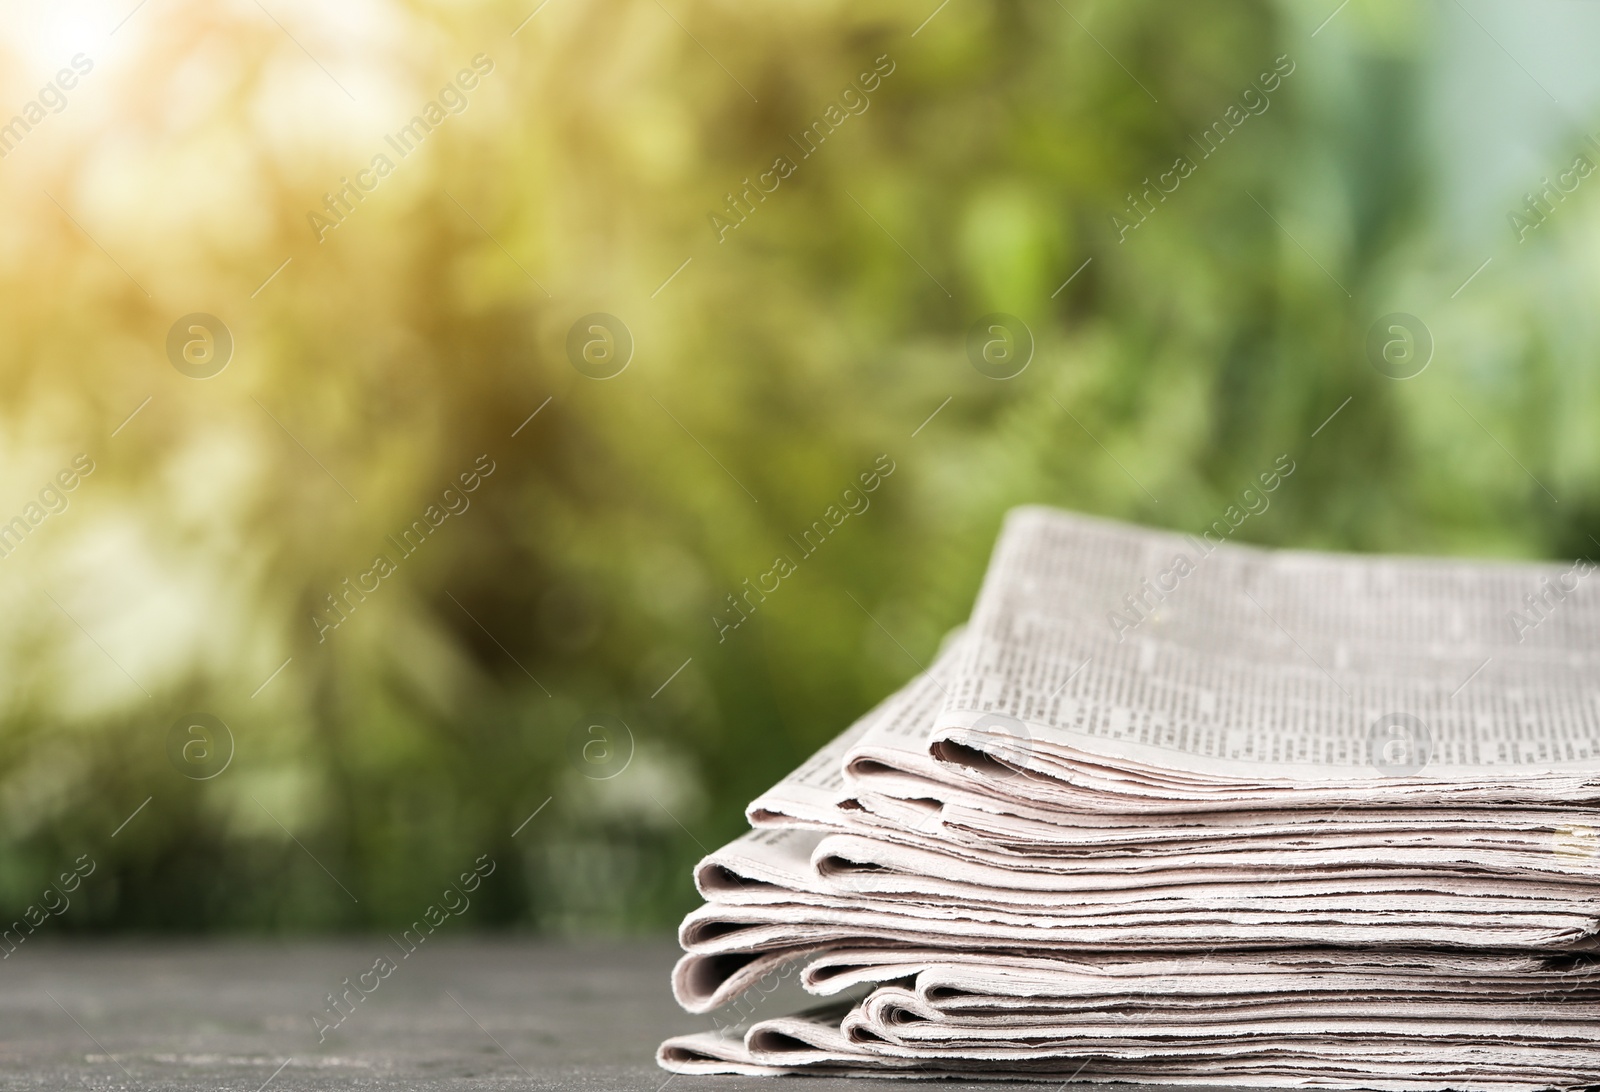 Image of Stack of newspapers on grey table against blurred green background, space for design. Journalist's work